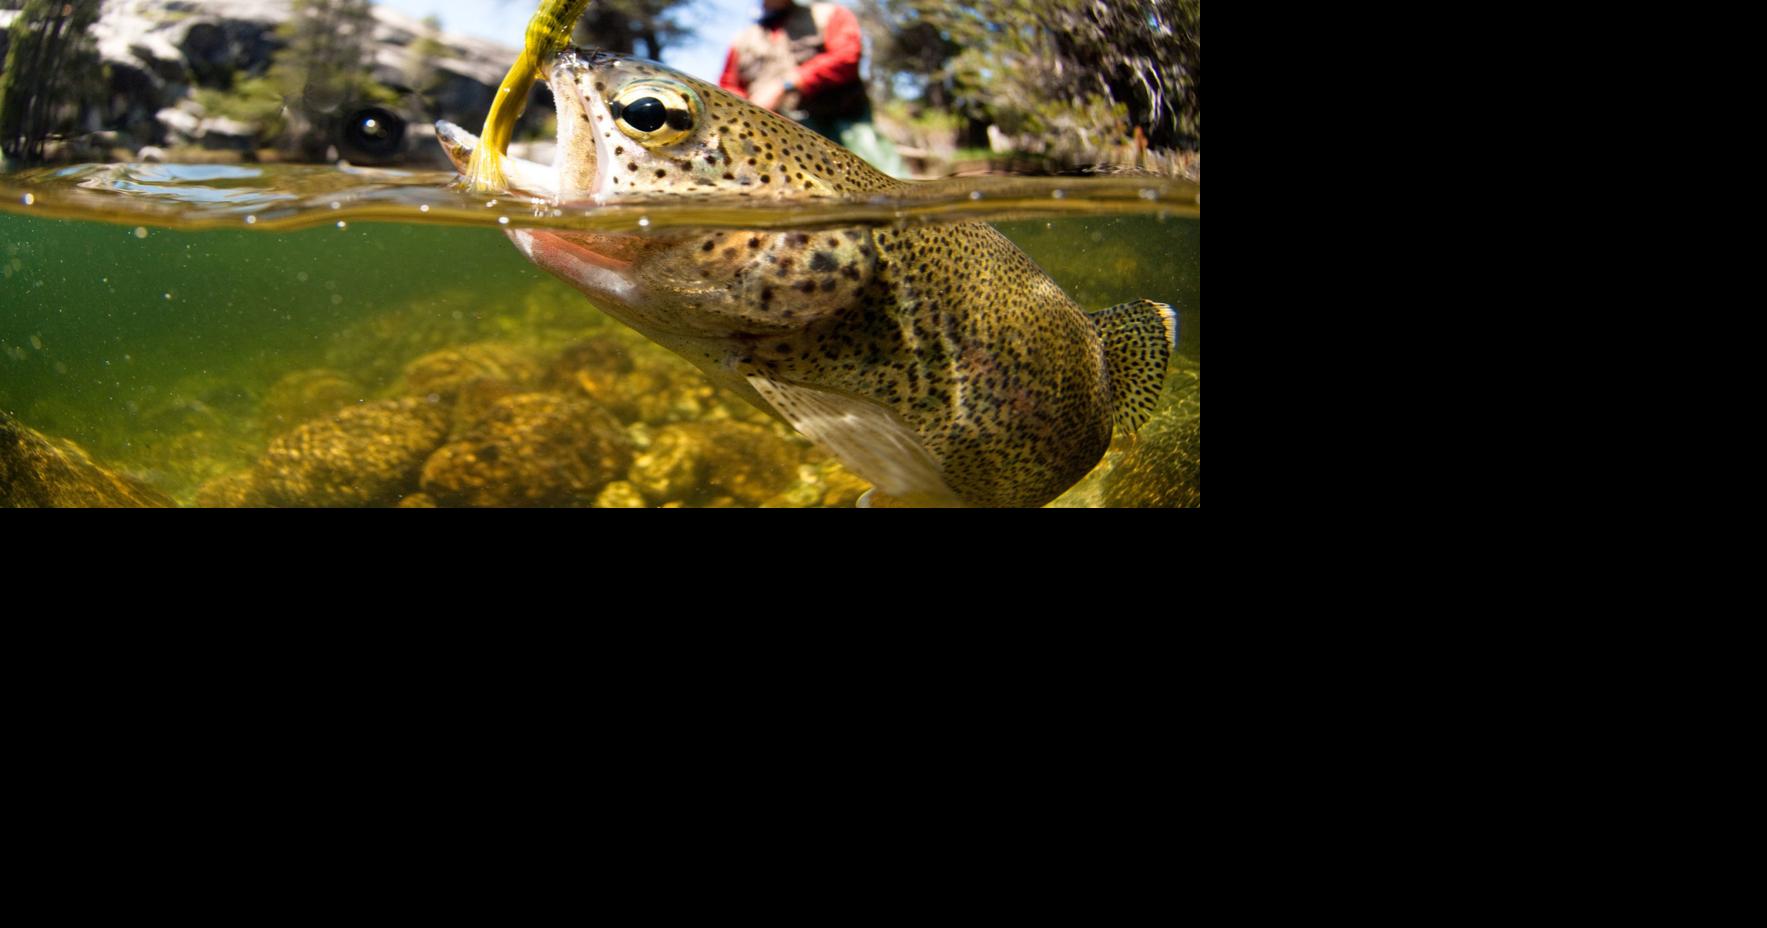 Some facts and thoughts about the sea trout, this great fish